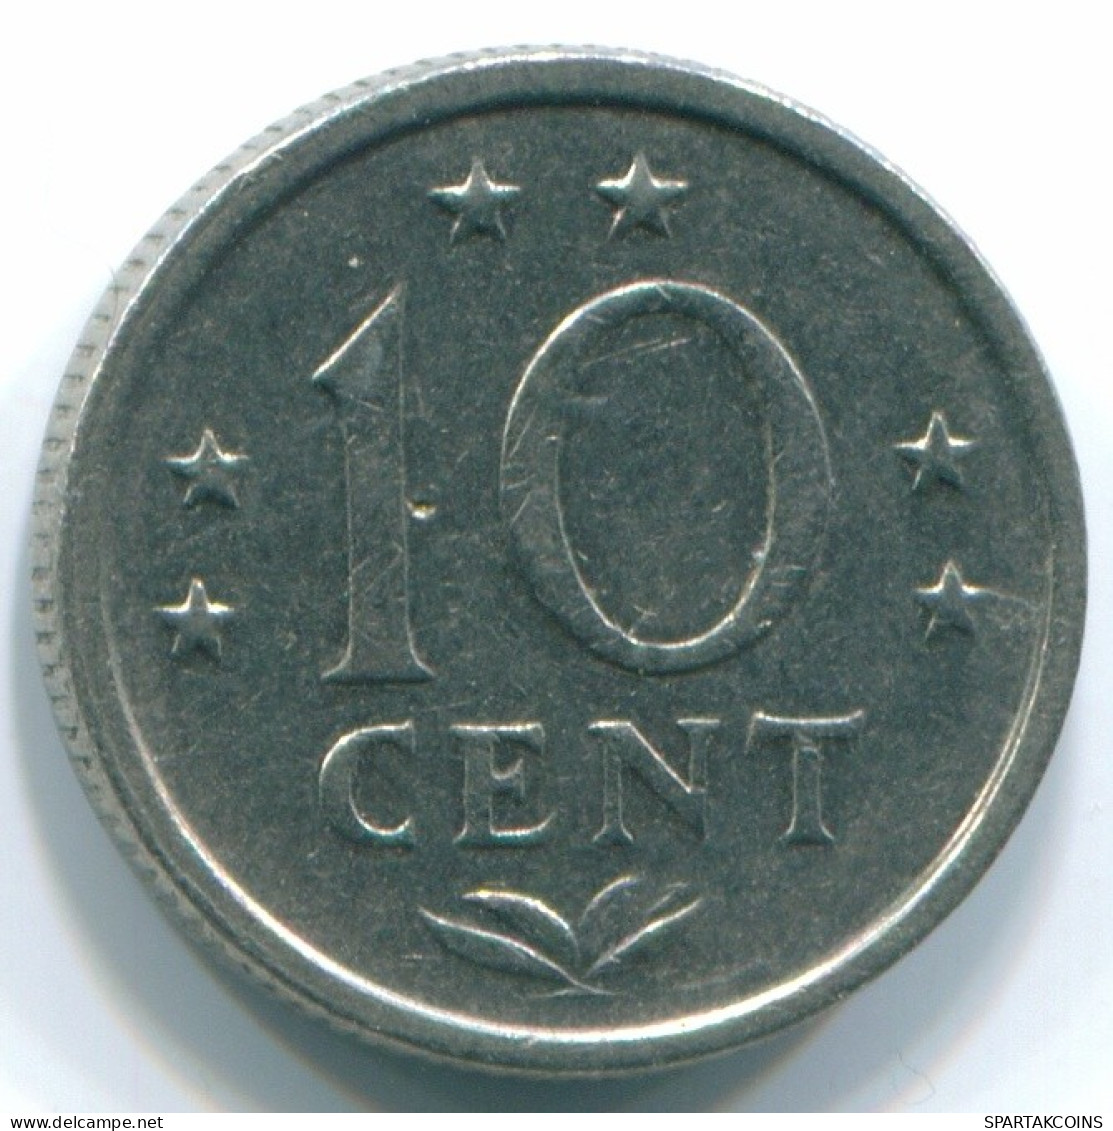 10 CENTS 1971 NETHERLANDS ANTILLES Nickel Colonial Coin #S13448.U.A - Netherlands Antilles